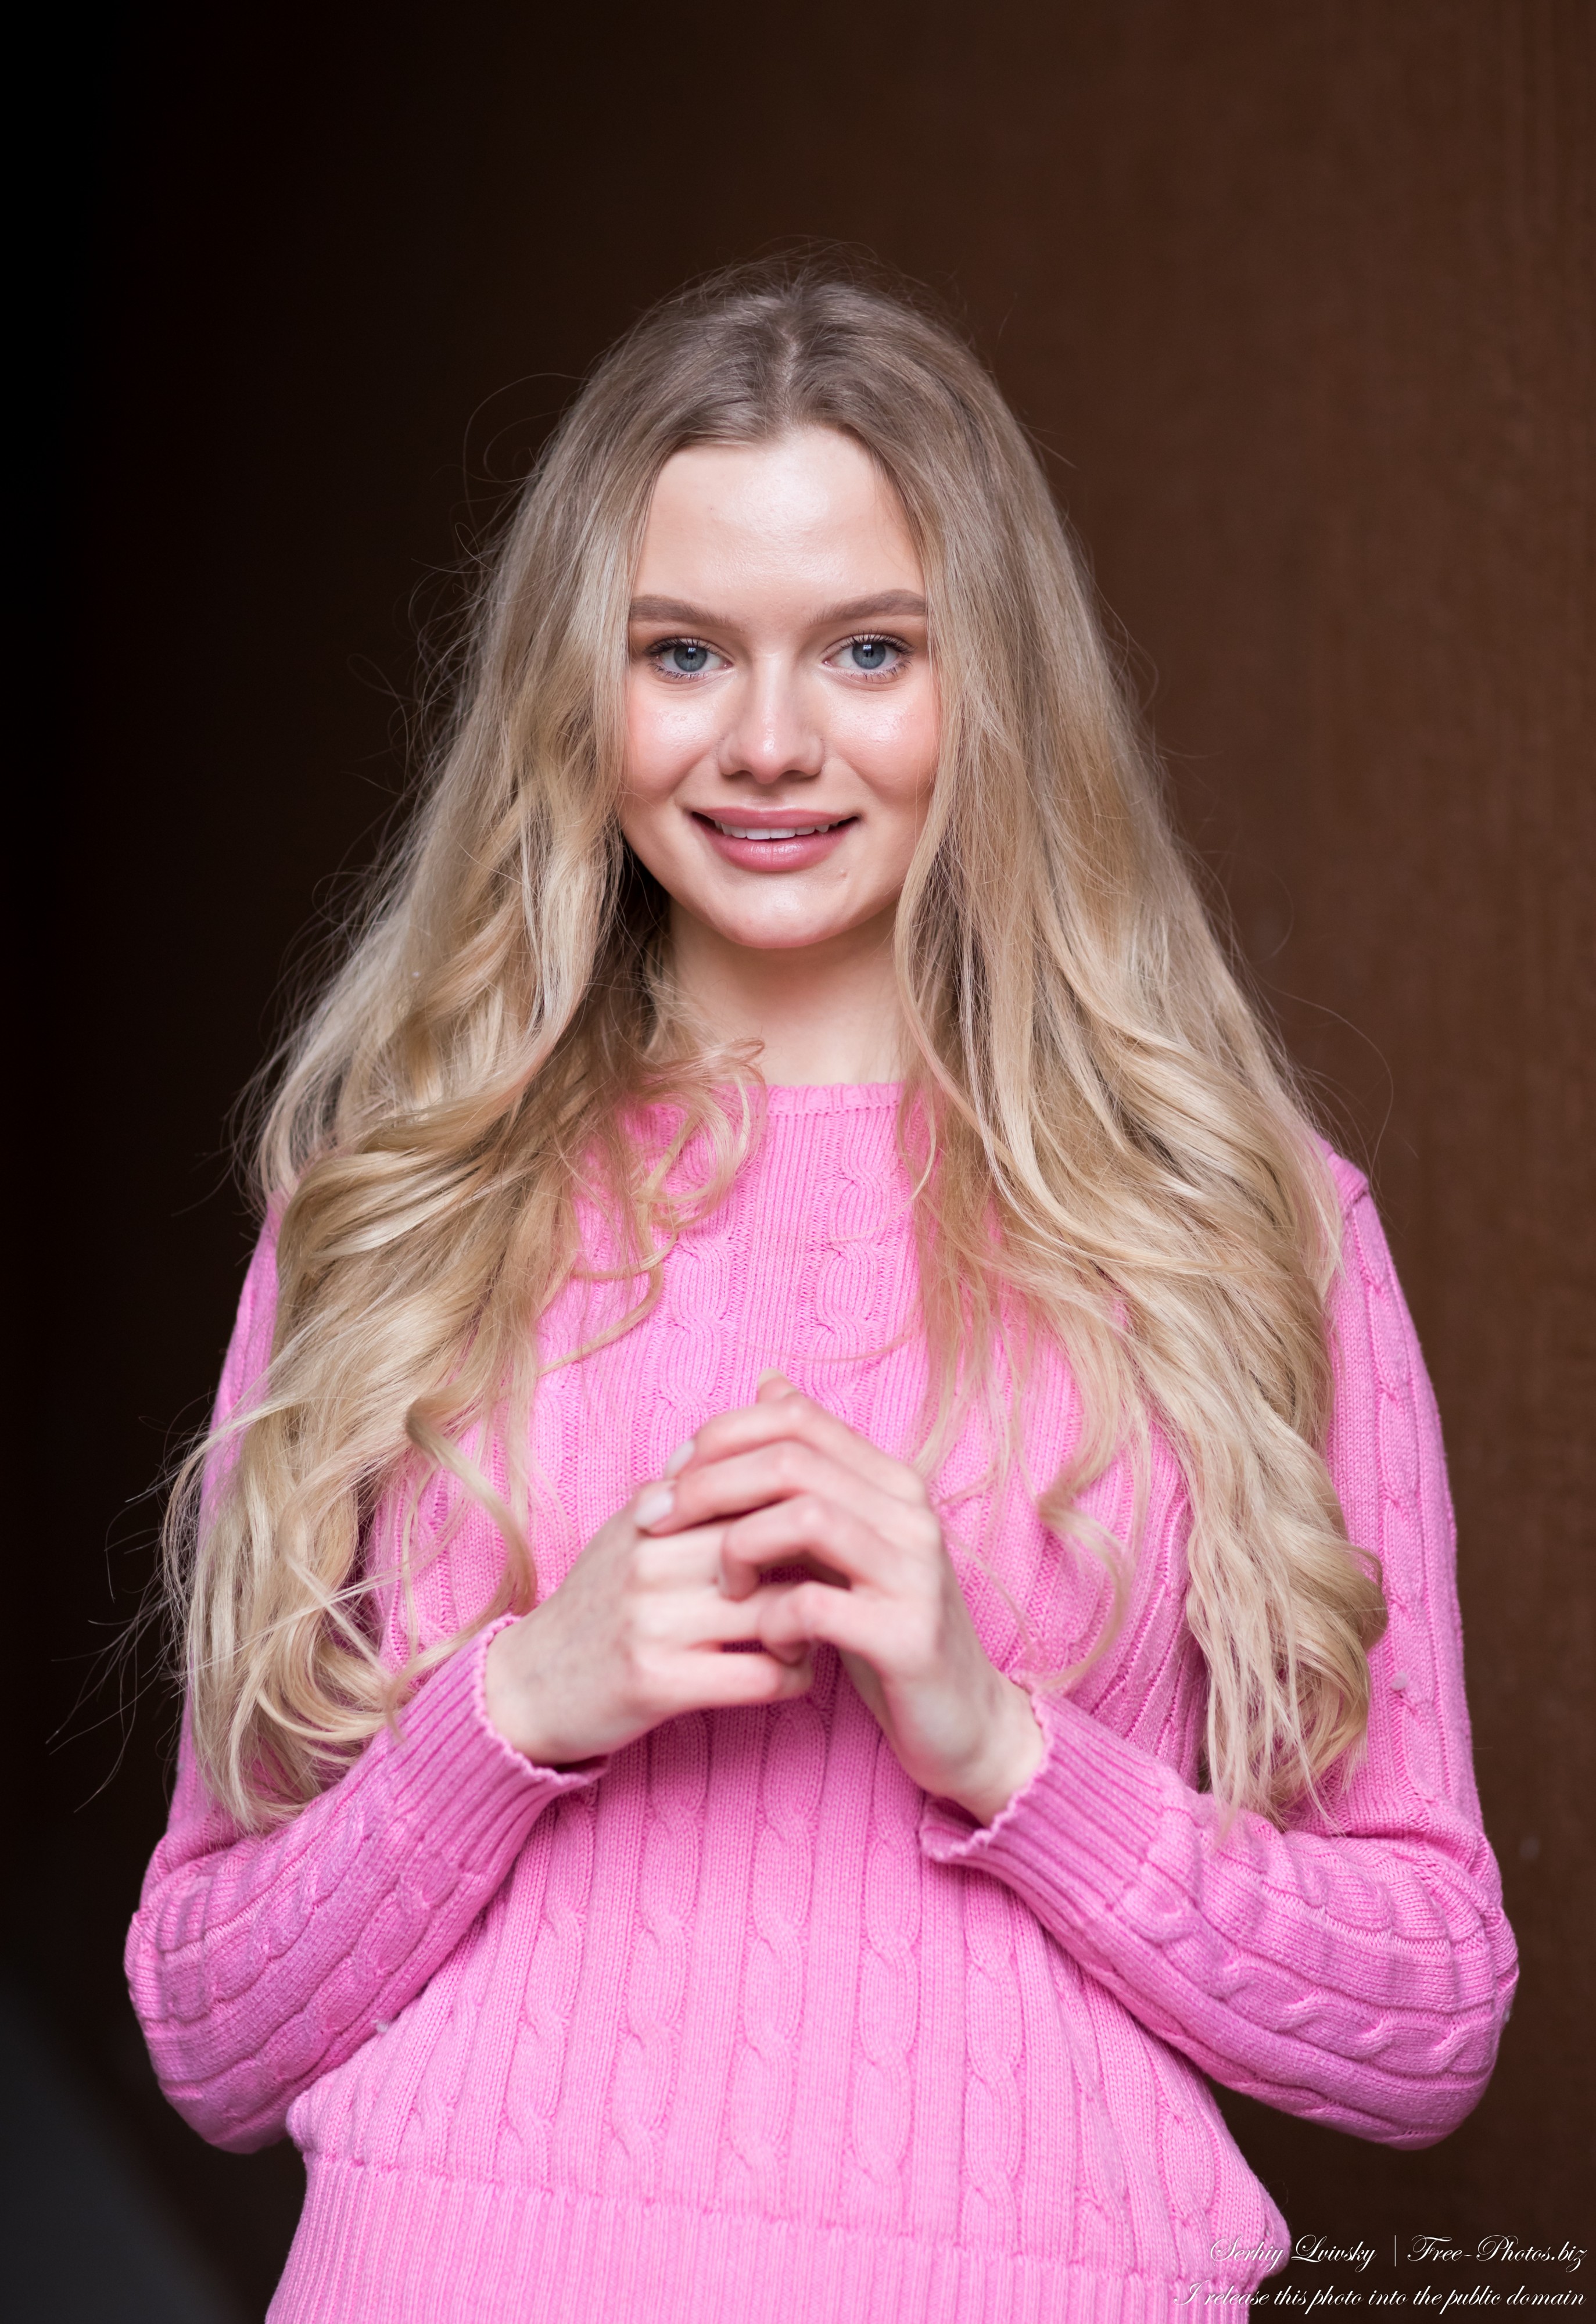 Oksana - a 19-year-old natural blonde girl photographed by Serhiy Lvivsky in March 2021, picture 13